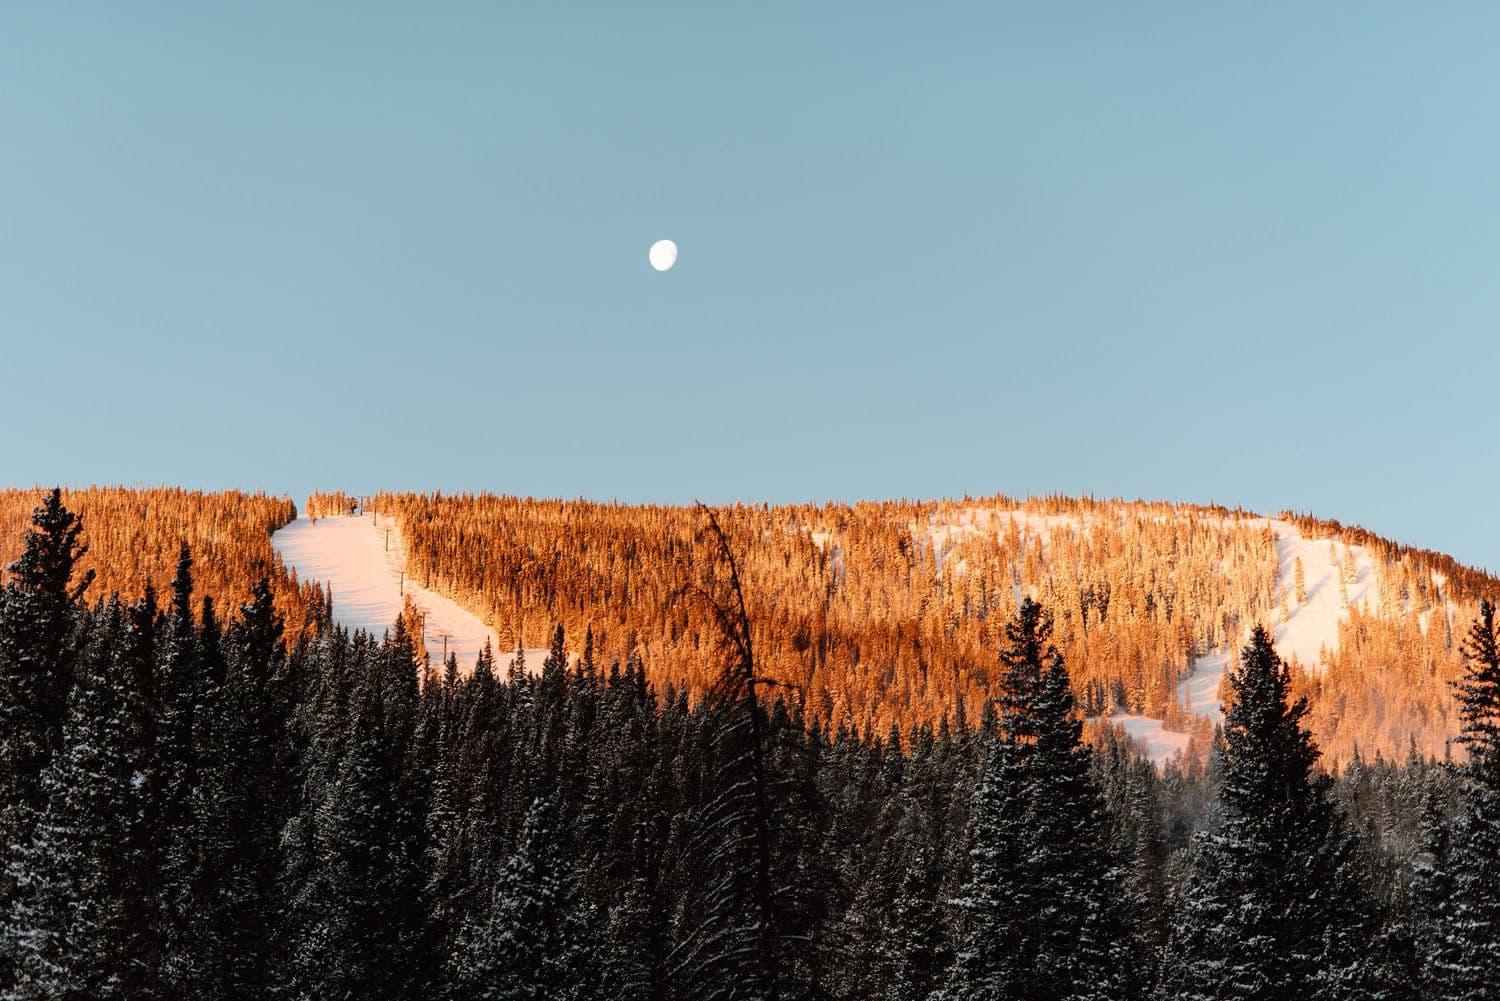 Landscape of forest, mountain, and full moon at Indian Peaks, in Colorado. 